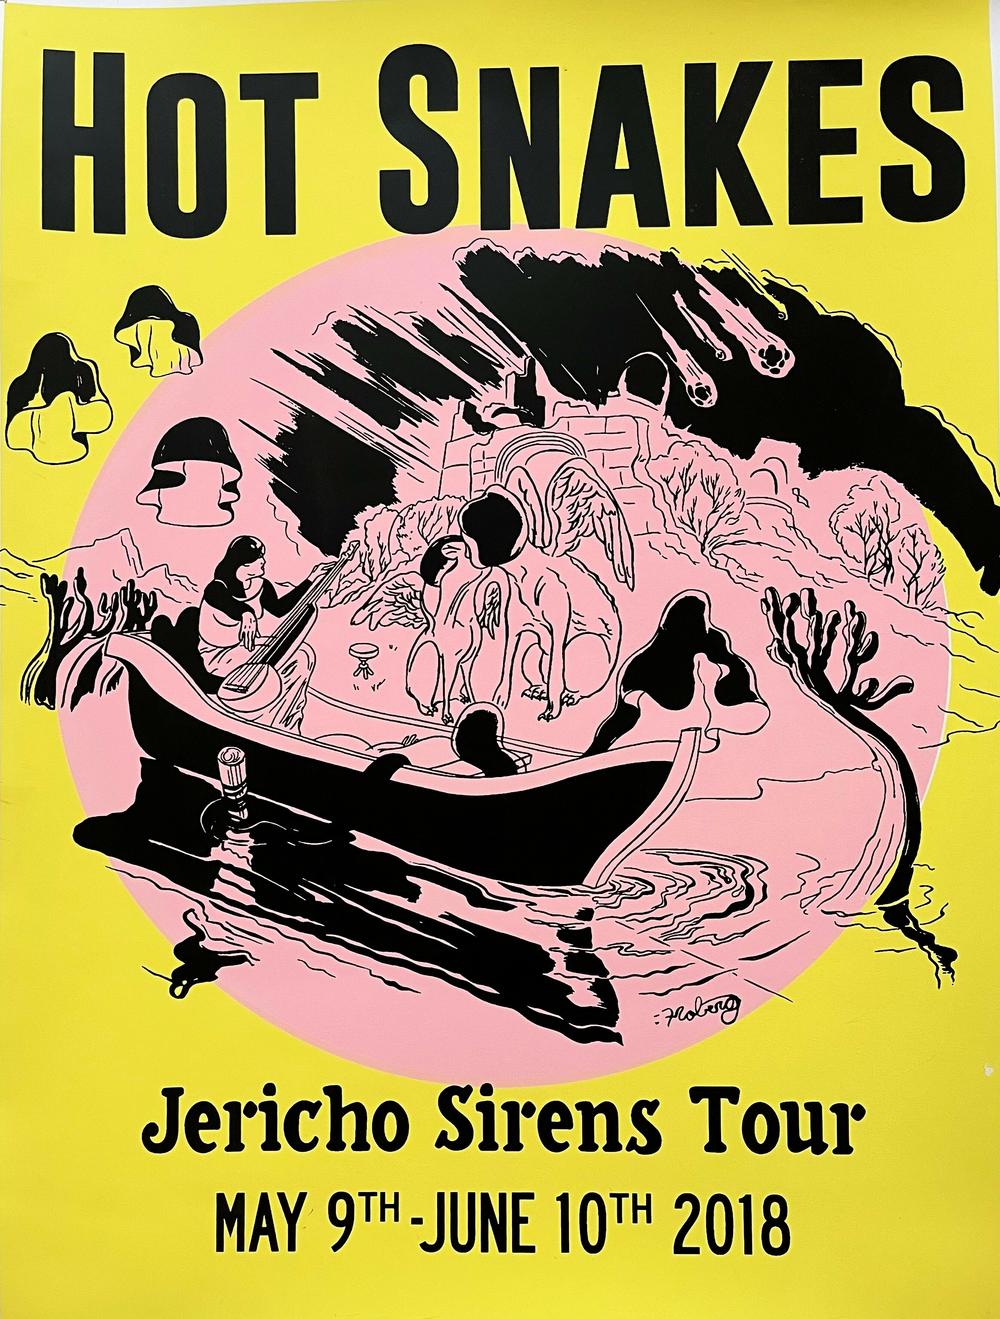 A poster featuring Rick Froberg's art for Hot Snakes' 2018 tour.